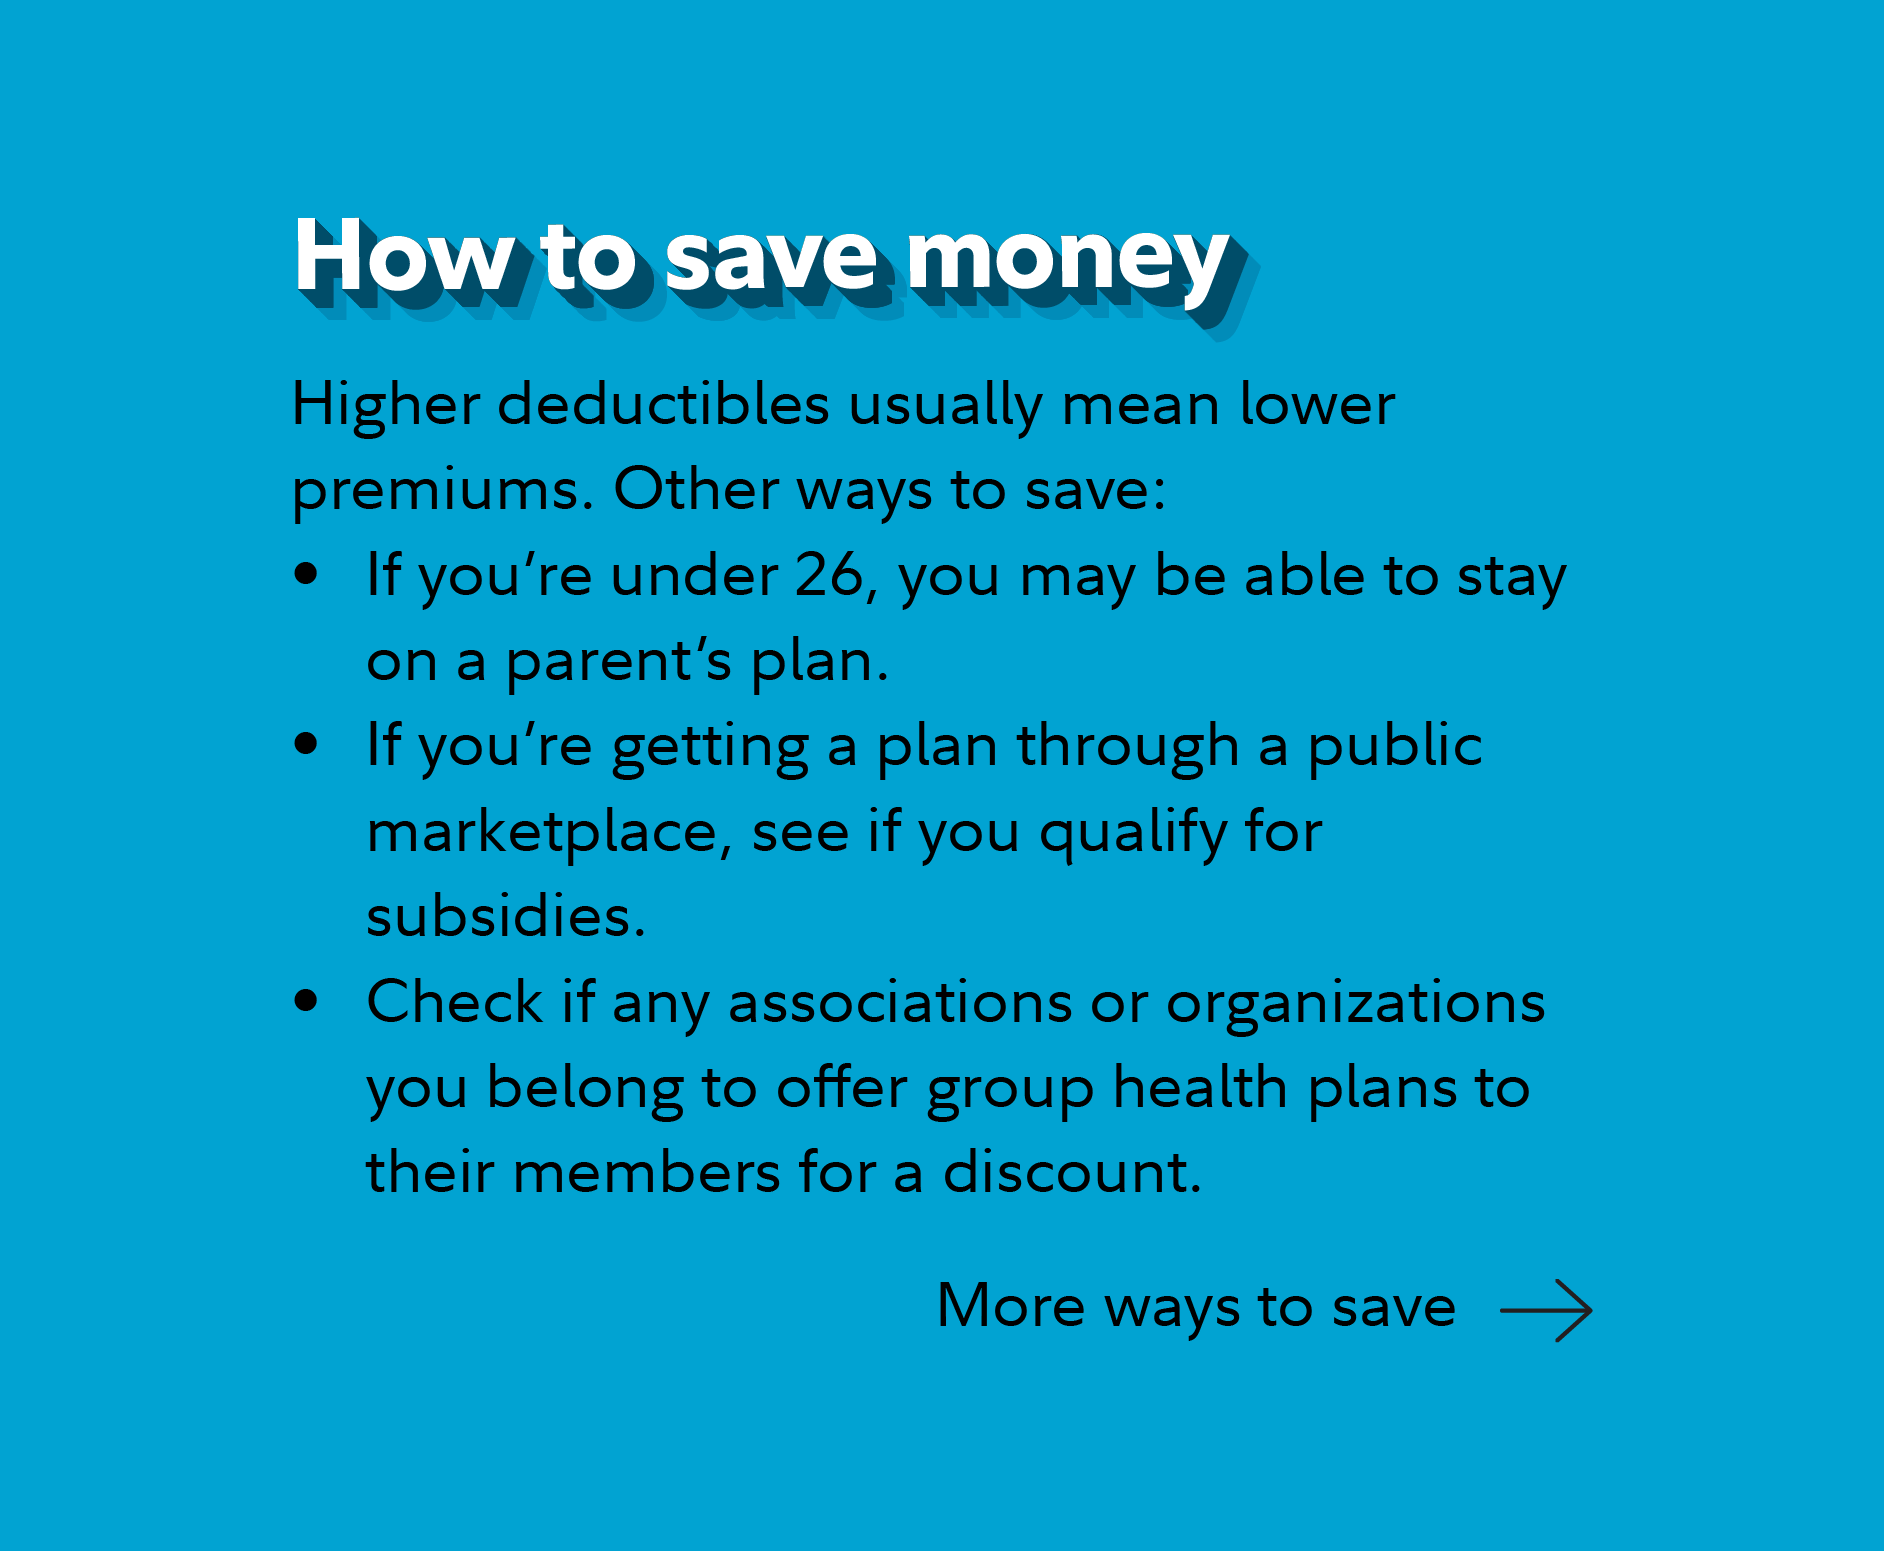 How to save money.  Higher deductibles usually mean lower premiums. Other ways to save:  If you're under 26, you may be able to stay on a parent's plan.  If you're getting a plan through a public marketplace, see if you qualify for subsidies. Check if any associations or organizations you belong to offer group health plans to their members for a discount. Continue for more ways to save.